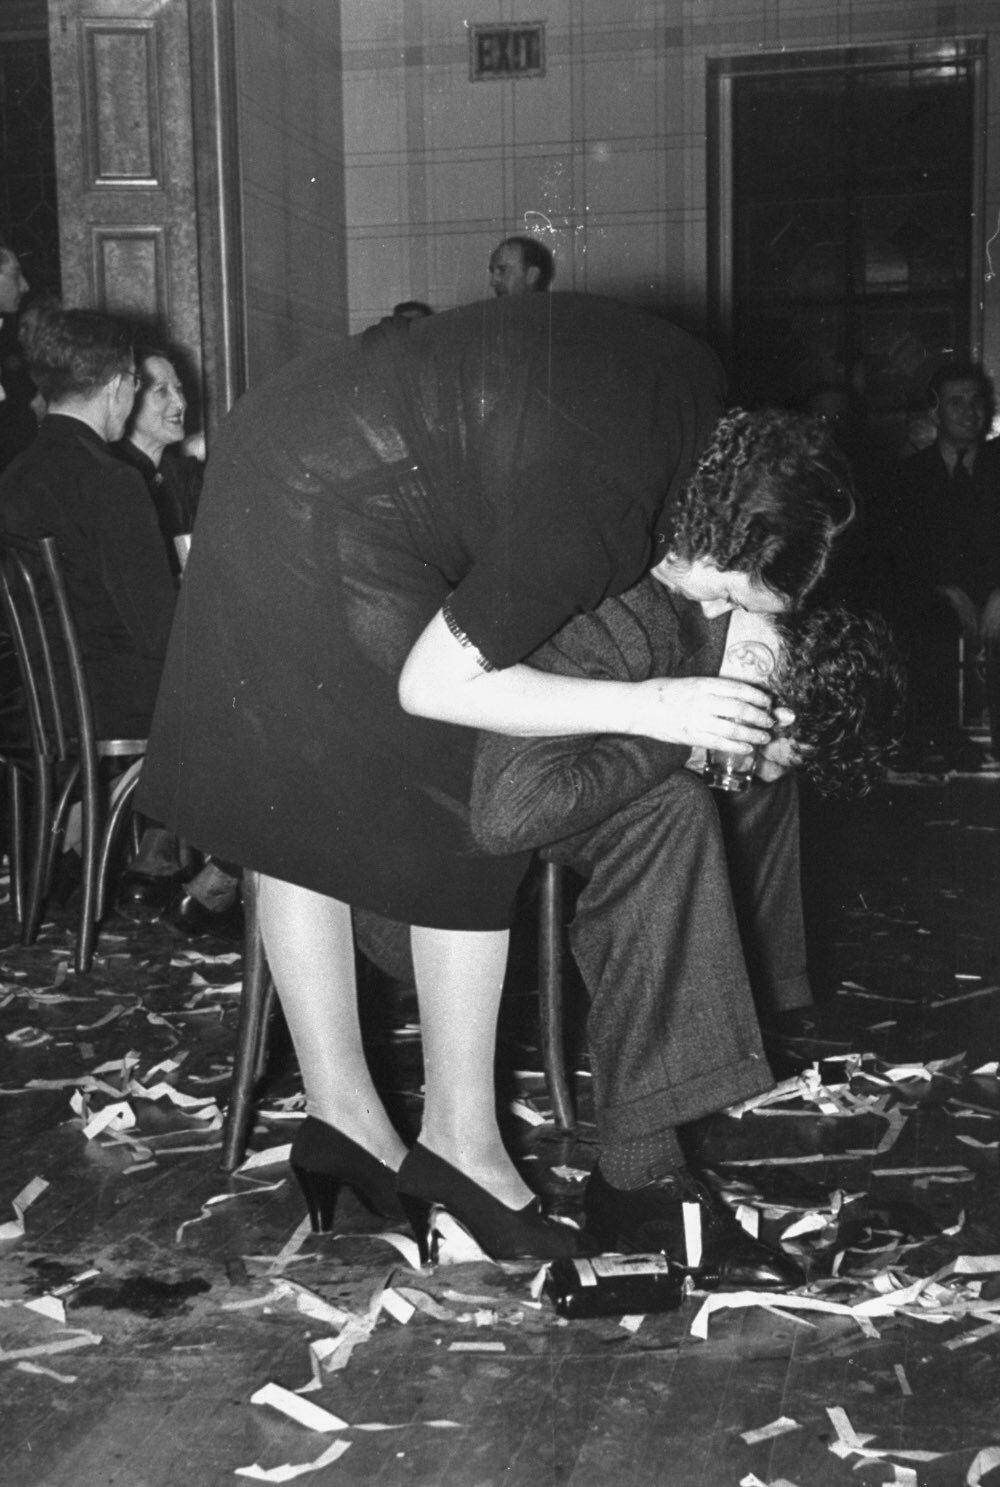 A Couple After Celebrating At The Webster Hall New Year’s Party In New York.